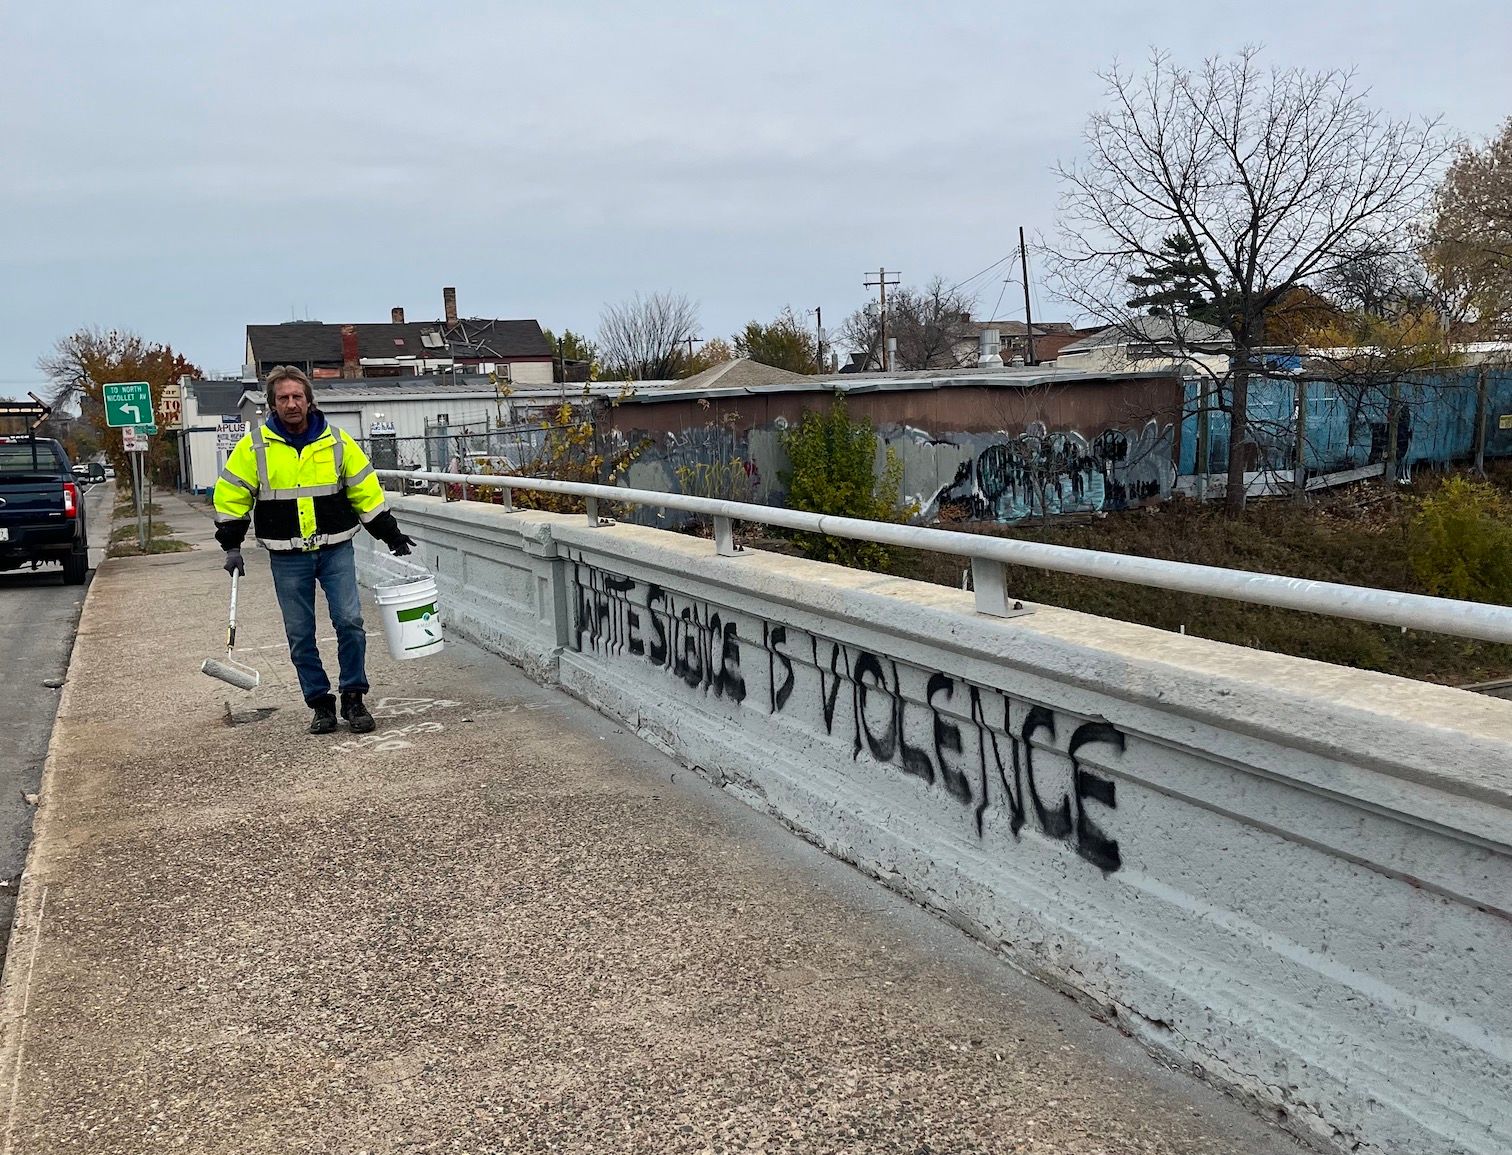 A man with a paint roller approaches a concrete bridge guard. Spray-painted on the bridge is the phrase "White Silence is Violence"